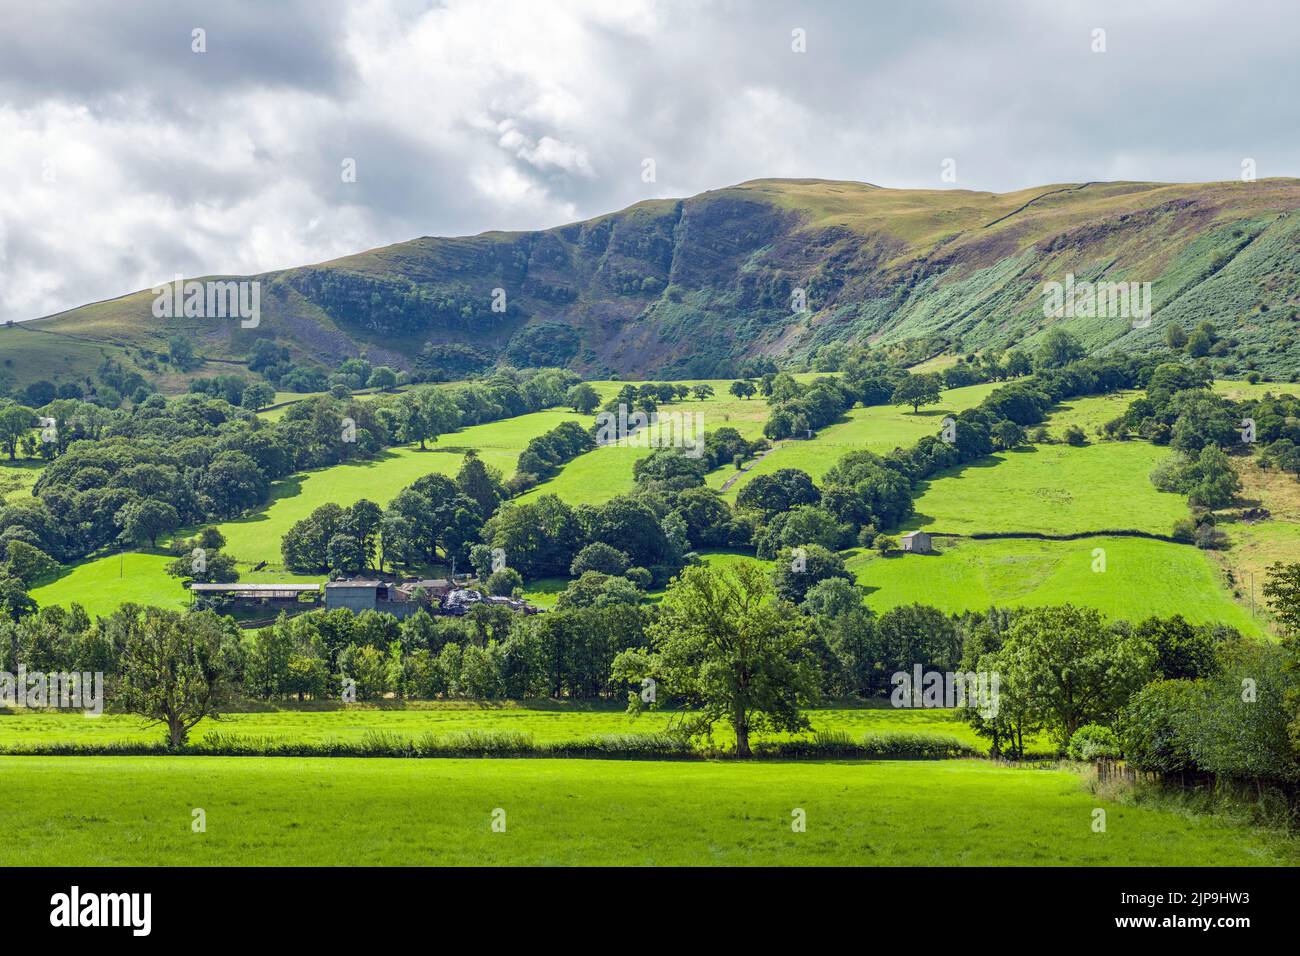 A stunning landscape view of both farmland and a high rocky fell as you head out west towards Sedbergh along Dentdale Stock Photo